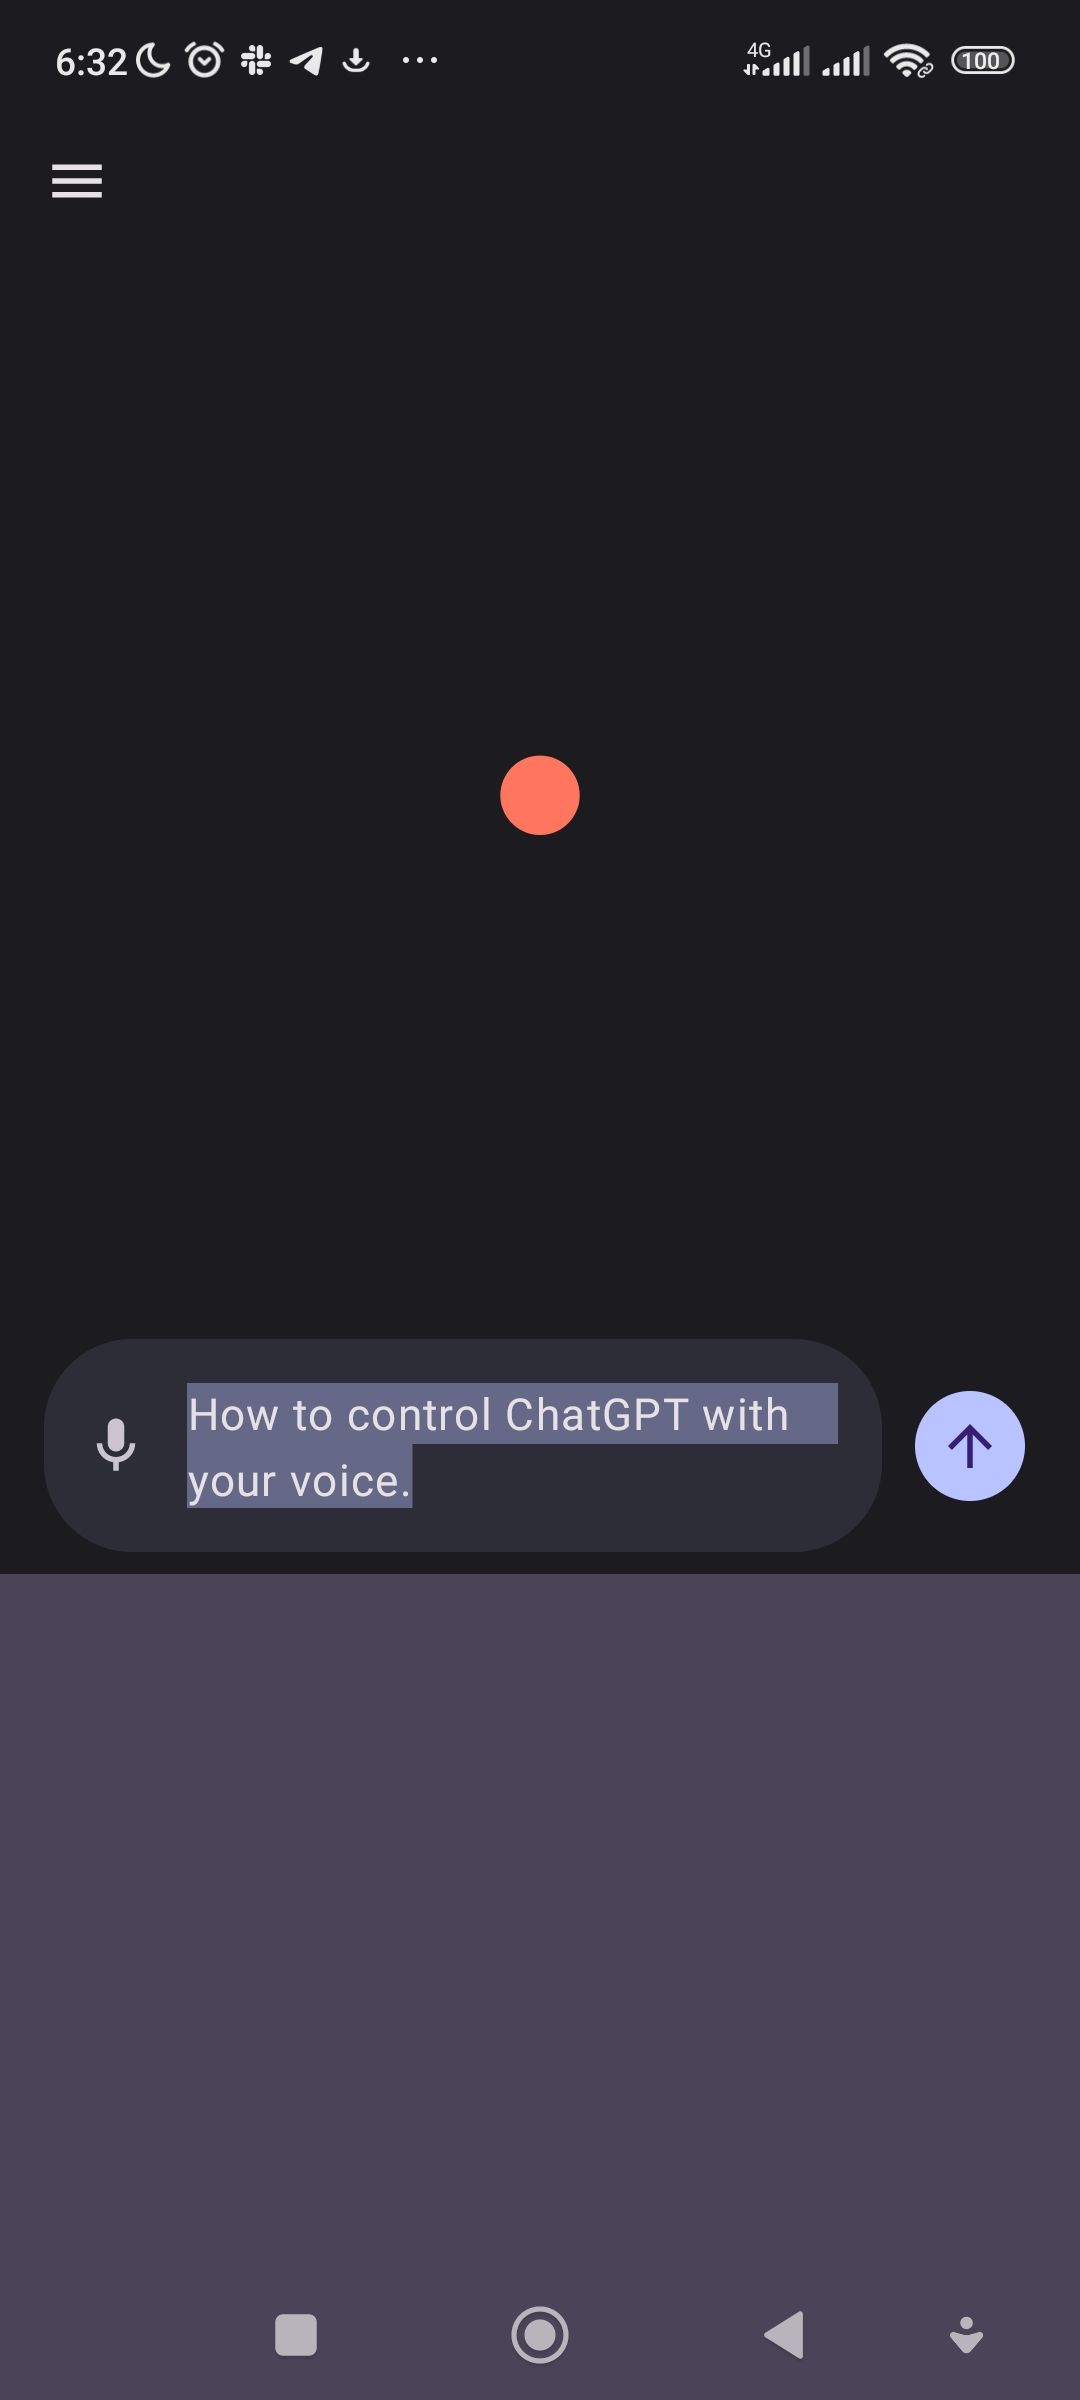 Controlling ChatGPT with your voice using the mobile app